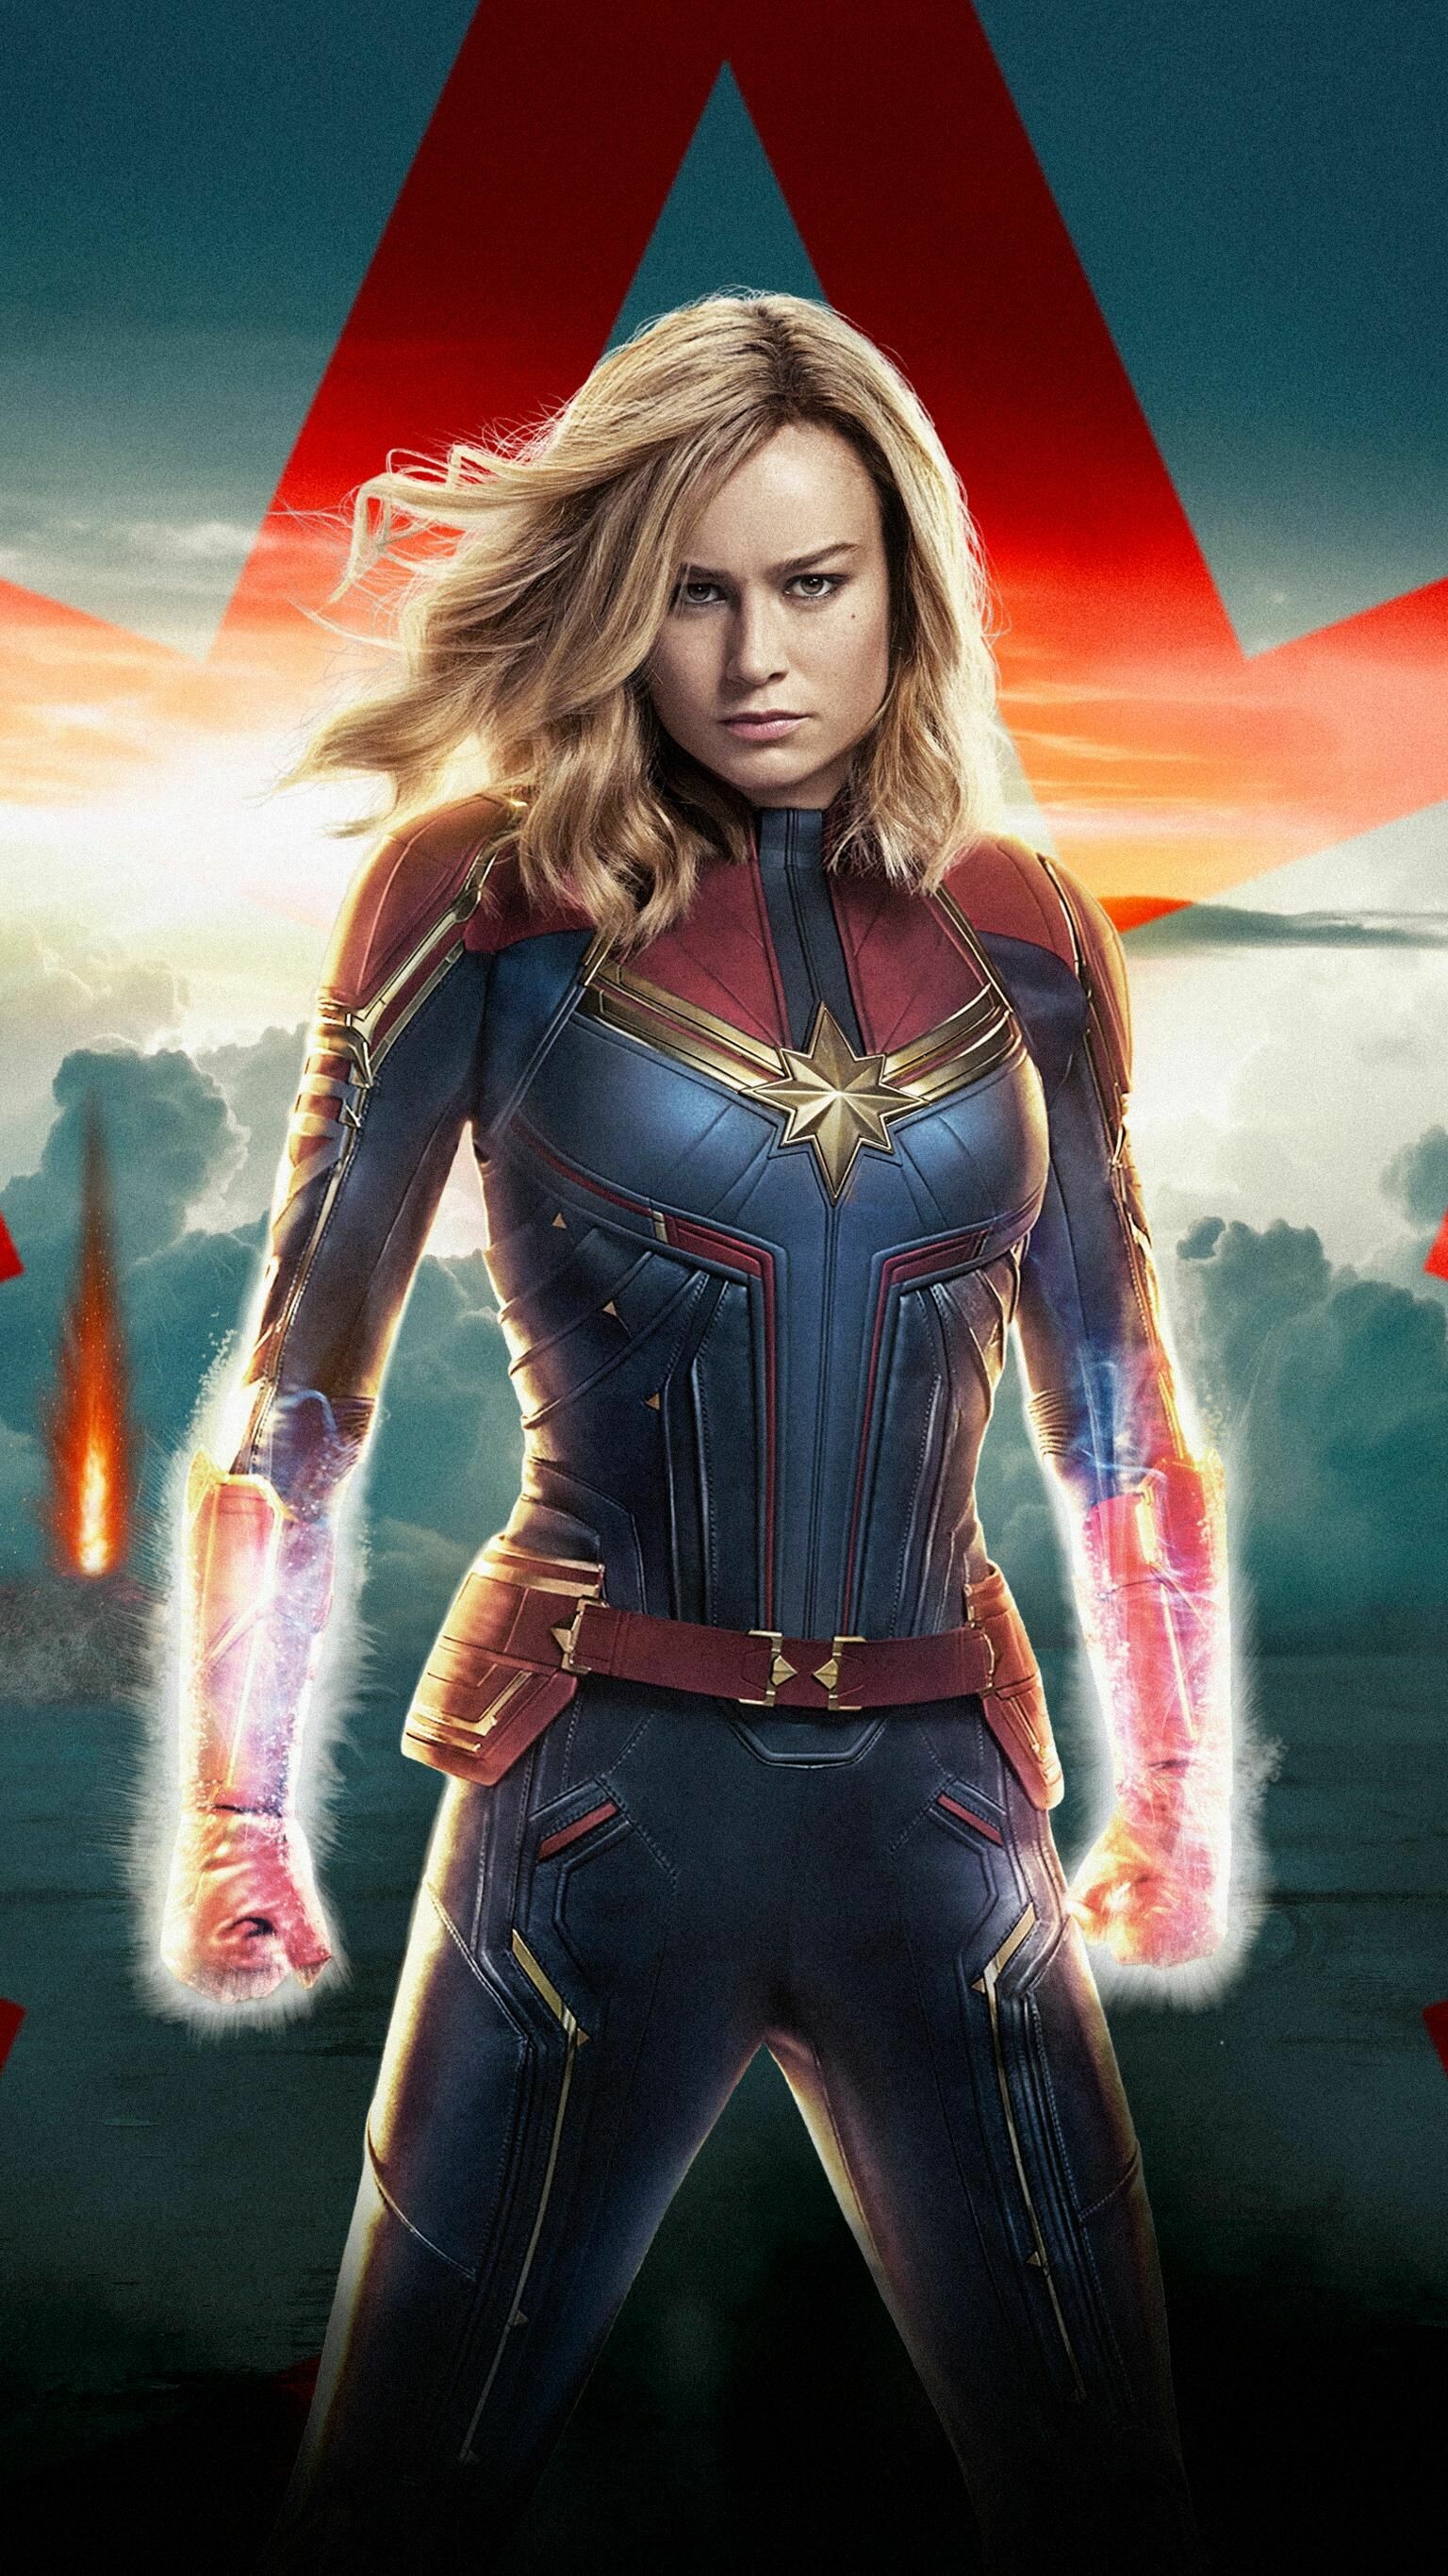 Captain Marvel: Brie Larson as Carol Danvers / Vers, imbued with superhuman strength and flight after exposure to Tesseract energy. 1540x2740 HD Wallpaper.